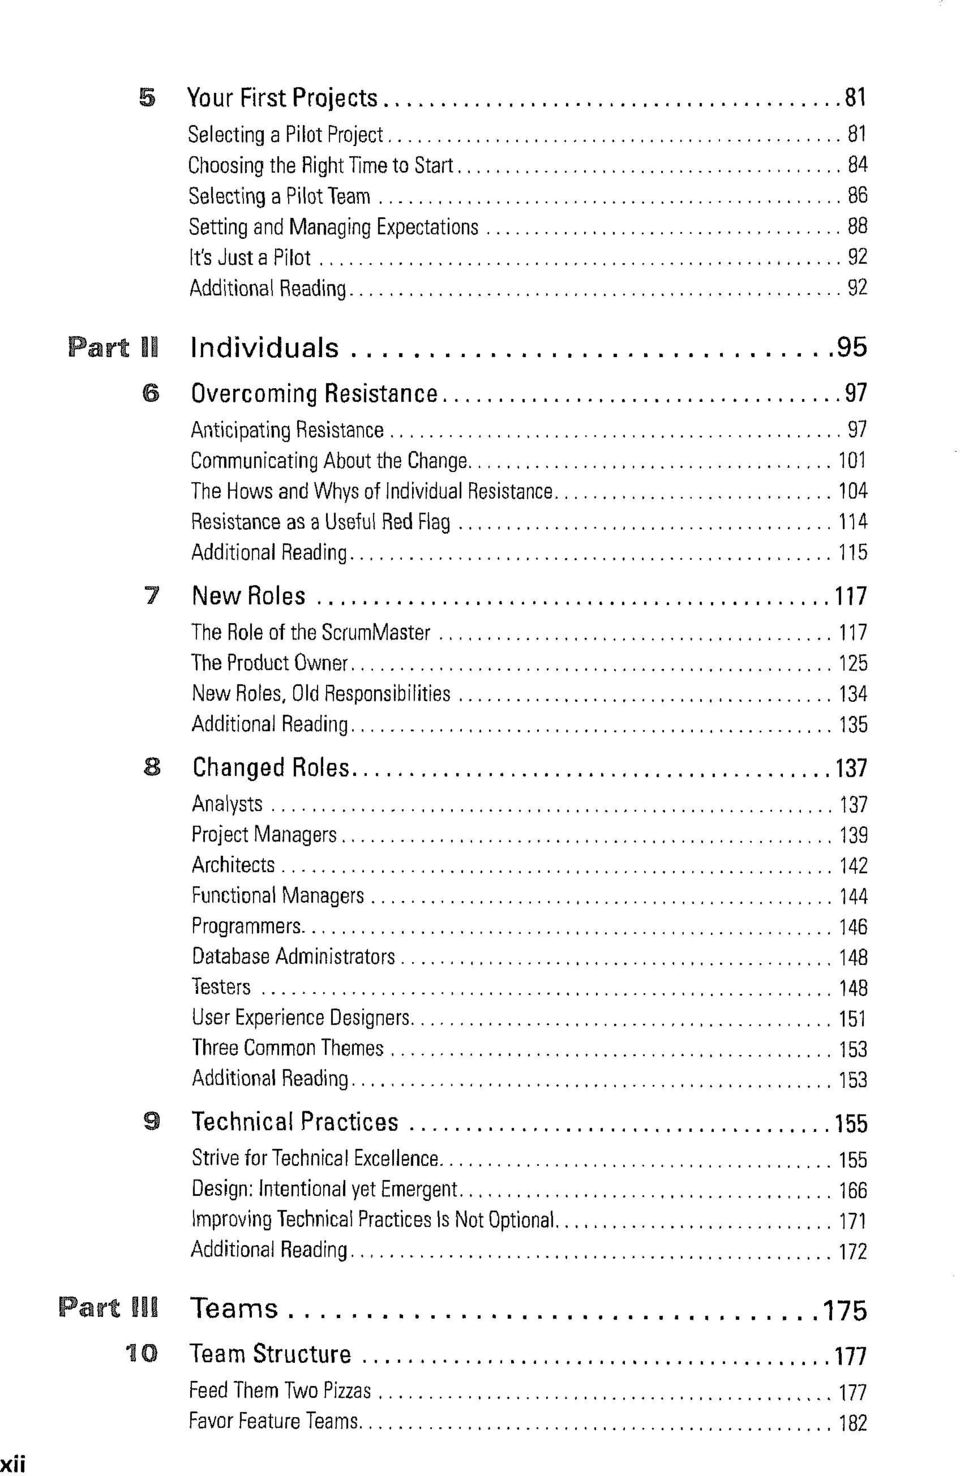 Additional Reading 115 7 New Roles 117 The Role of the ScrumMaster 117 The Product Owner New Roles, Old Responsibilities 134 Additional Reading 135 8 Changed Roles 137 Analysts 137 Project Managers